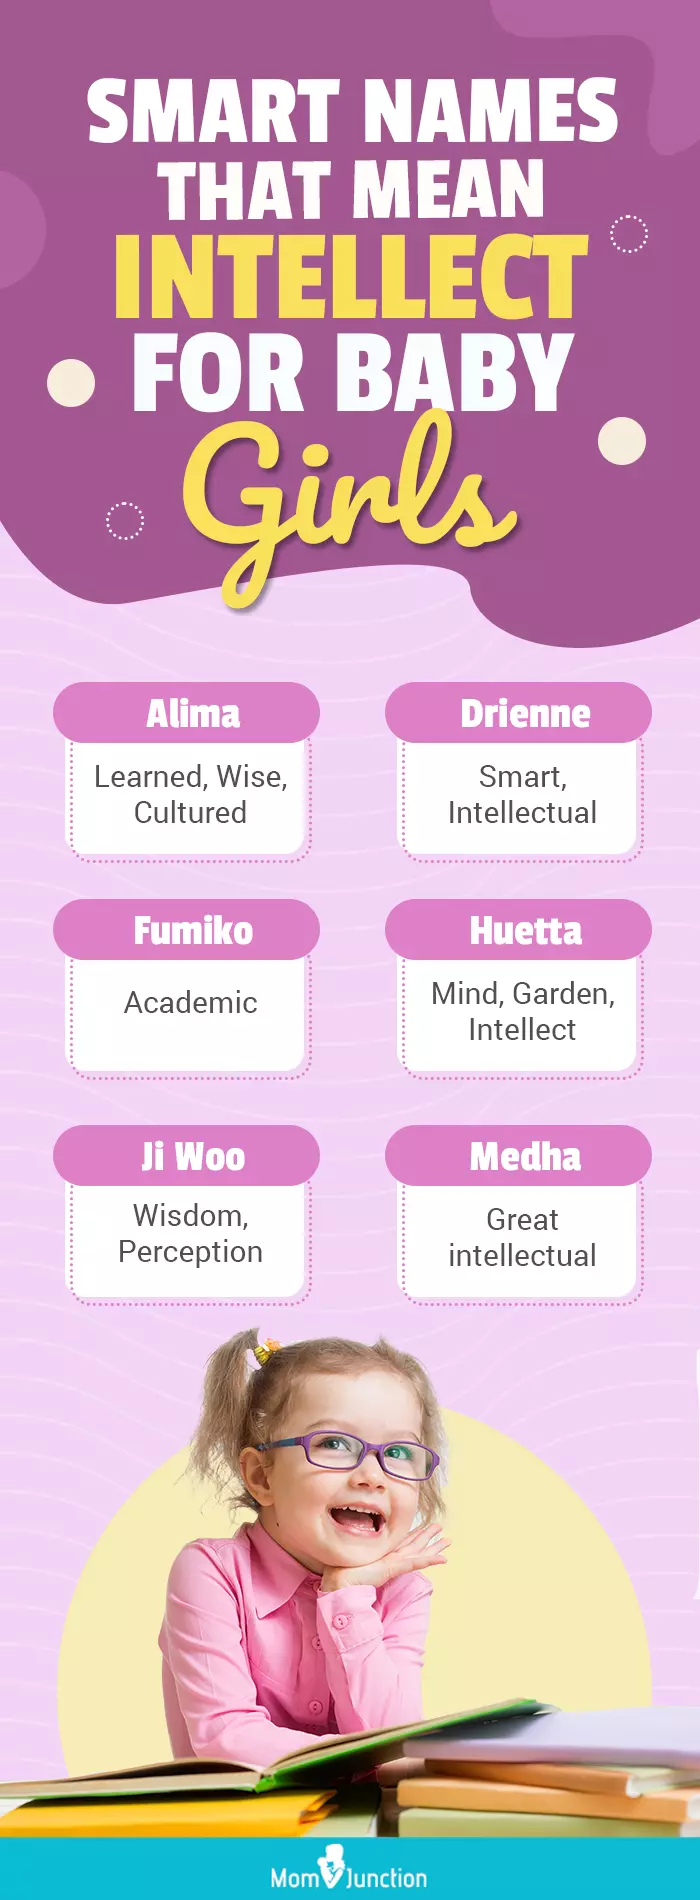 Smart Names That Mean Intellect For Baby Girls (infographic)